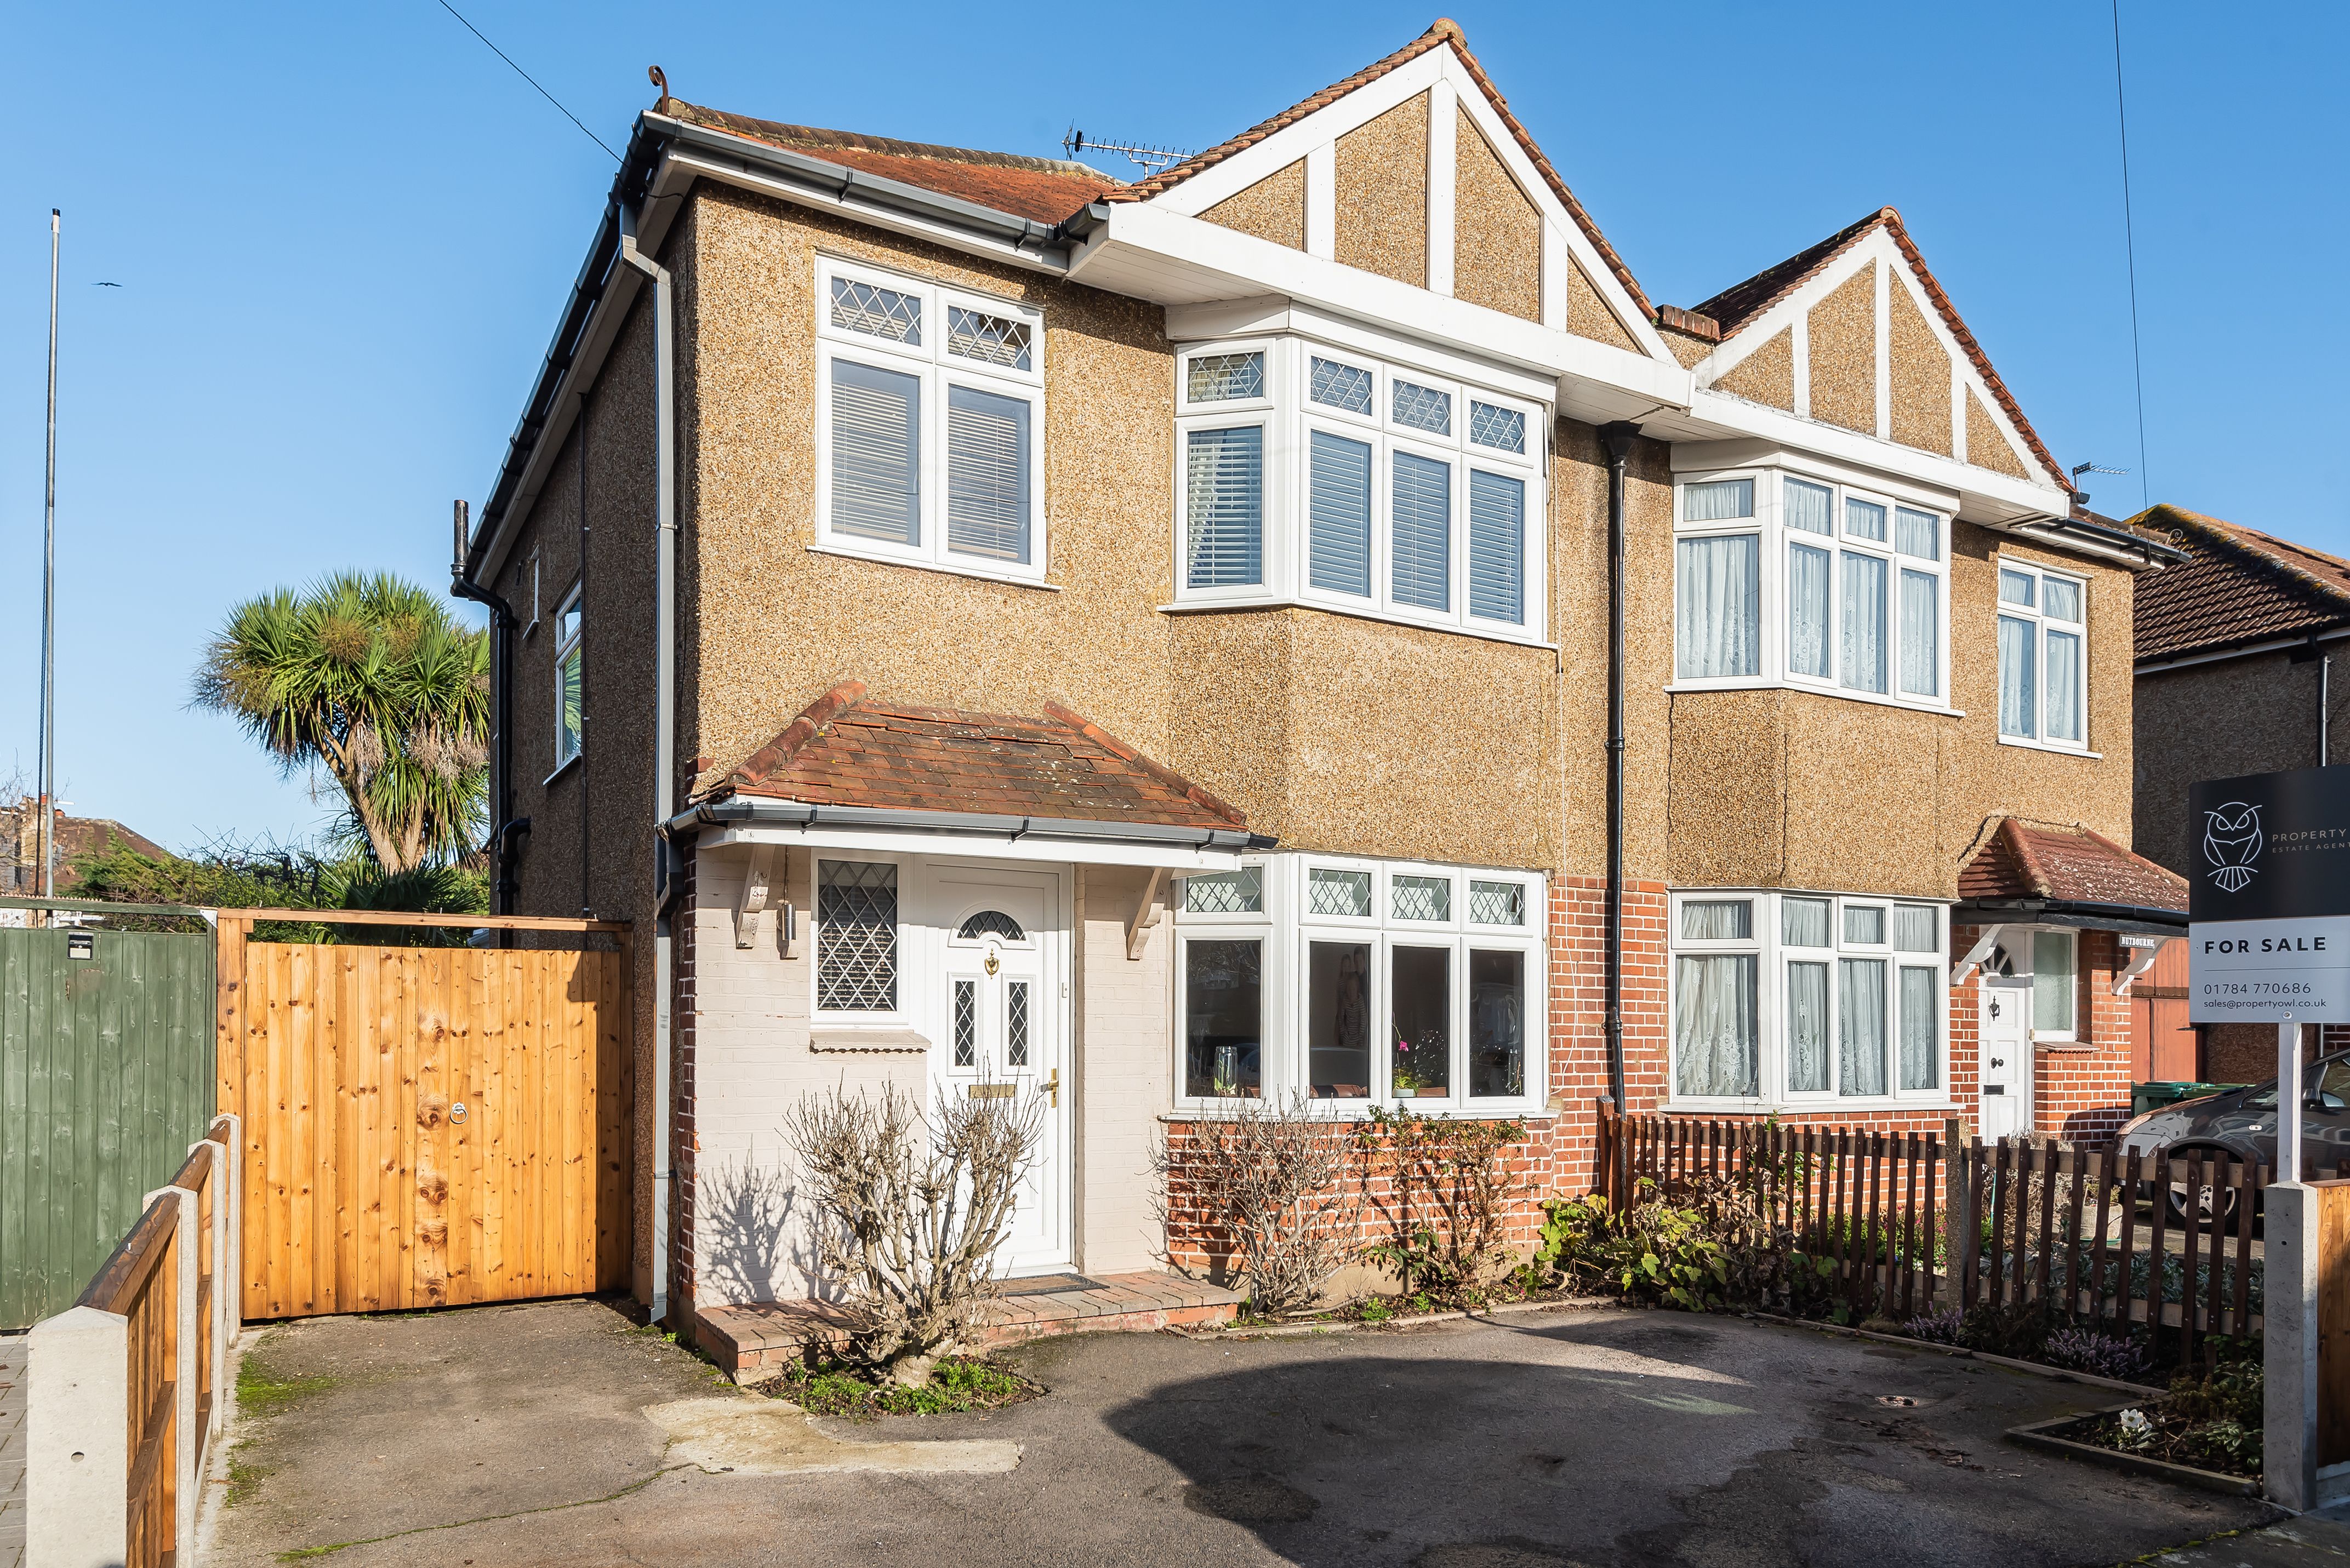 3 bed semi-detached house for sale in Pavilion Gardens, Staines-Upon-Thames 0